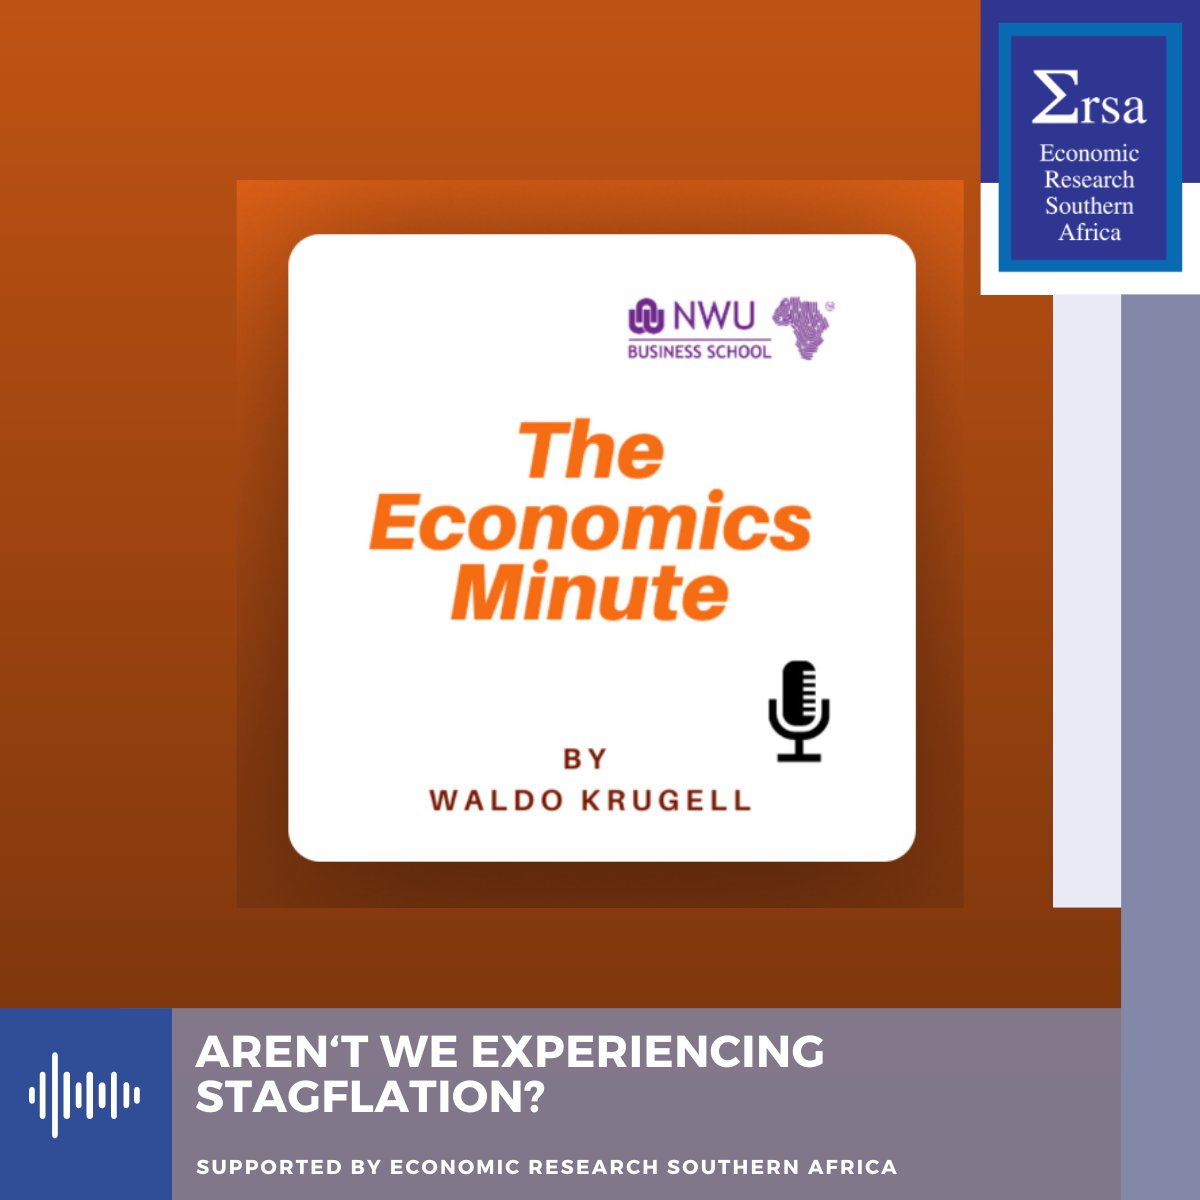 In today's ‘The Economics Minute’ Podcast by @WaldoKrugell, he discusses what makes stagflation stagflation. What is the nature of SA's inflation? And if the interest rate was lowered, what would happen in a stagflationary environment? Listen: open.spotify.com/episode/7DYfVR… #MPC